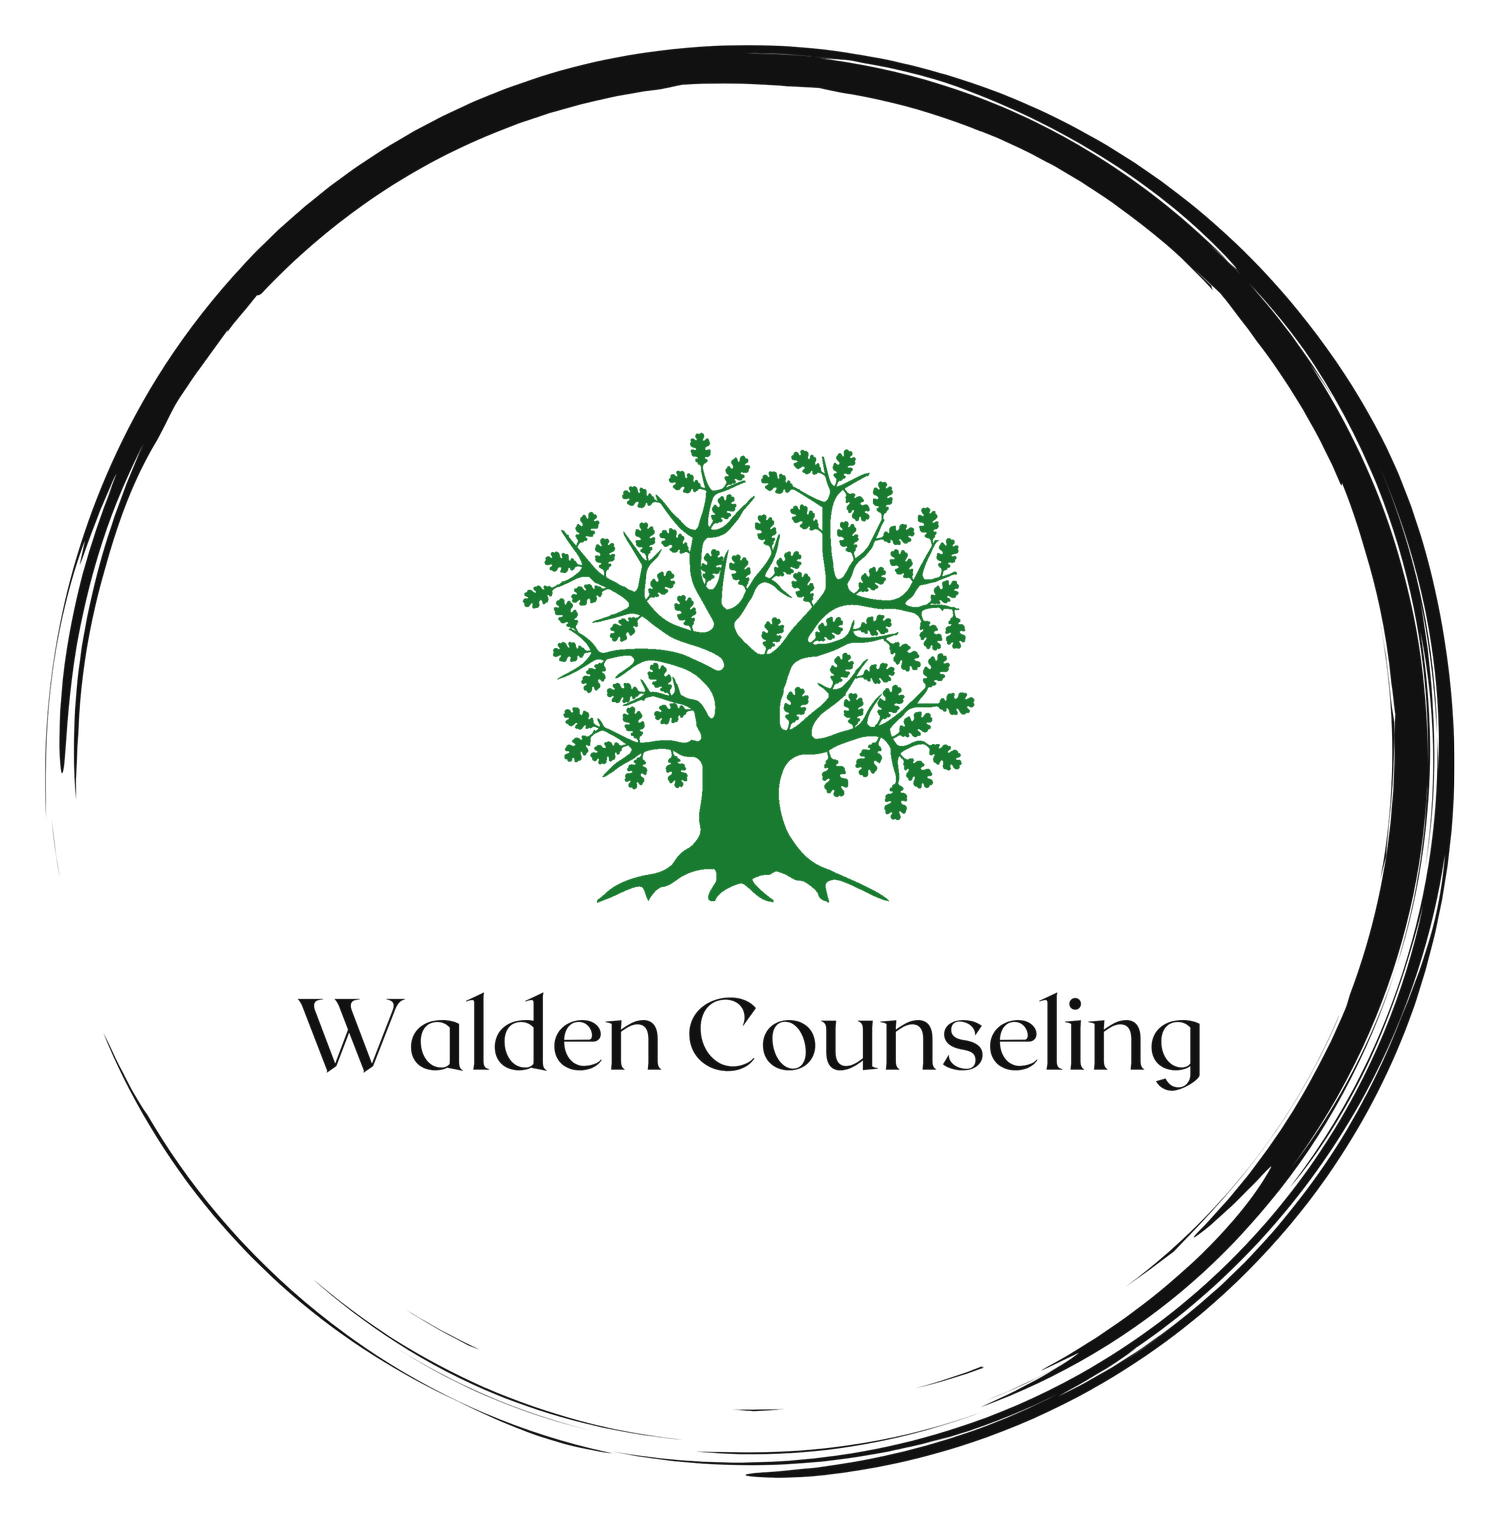 Walden Counseling Services